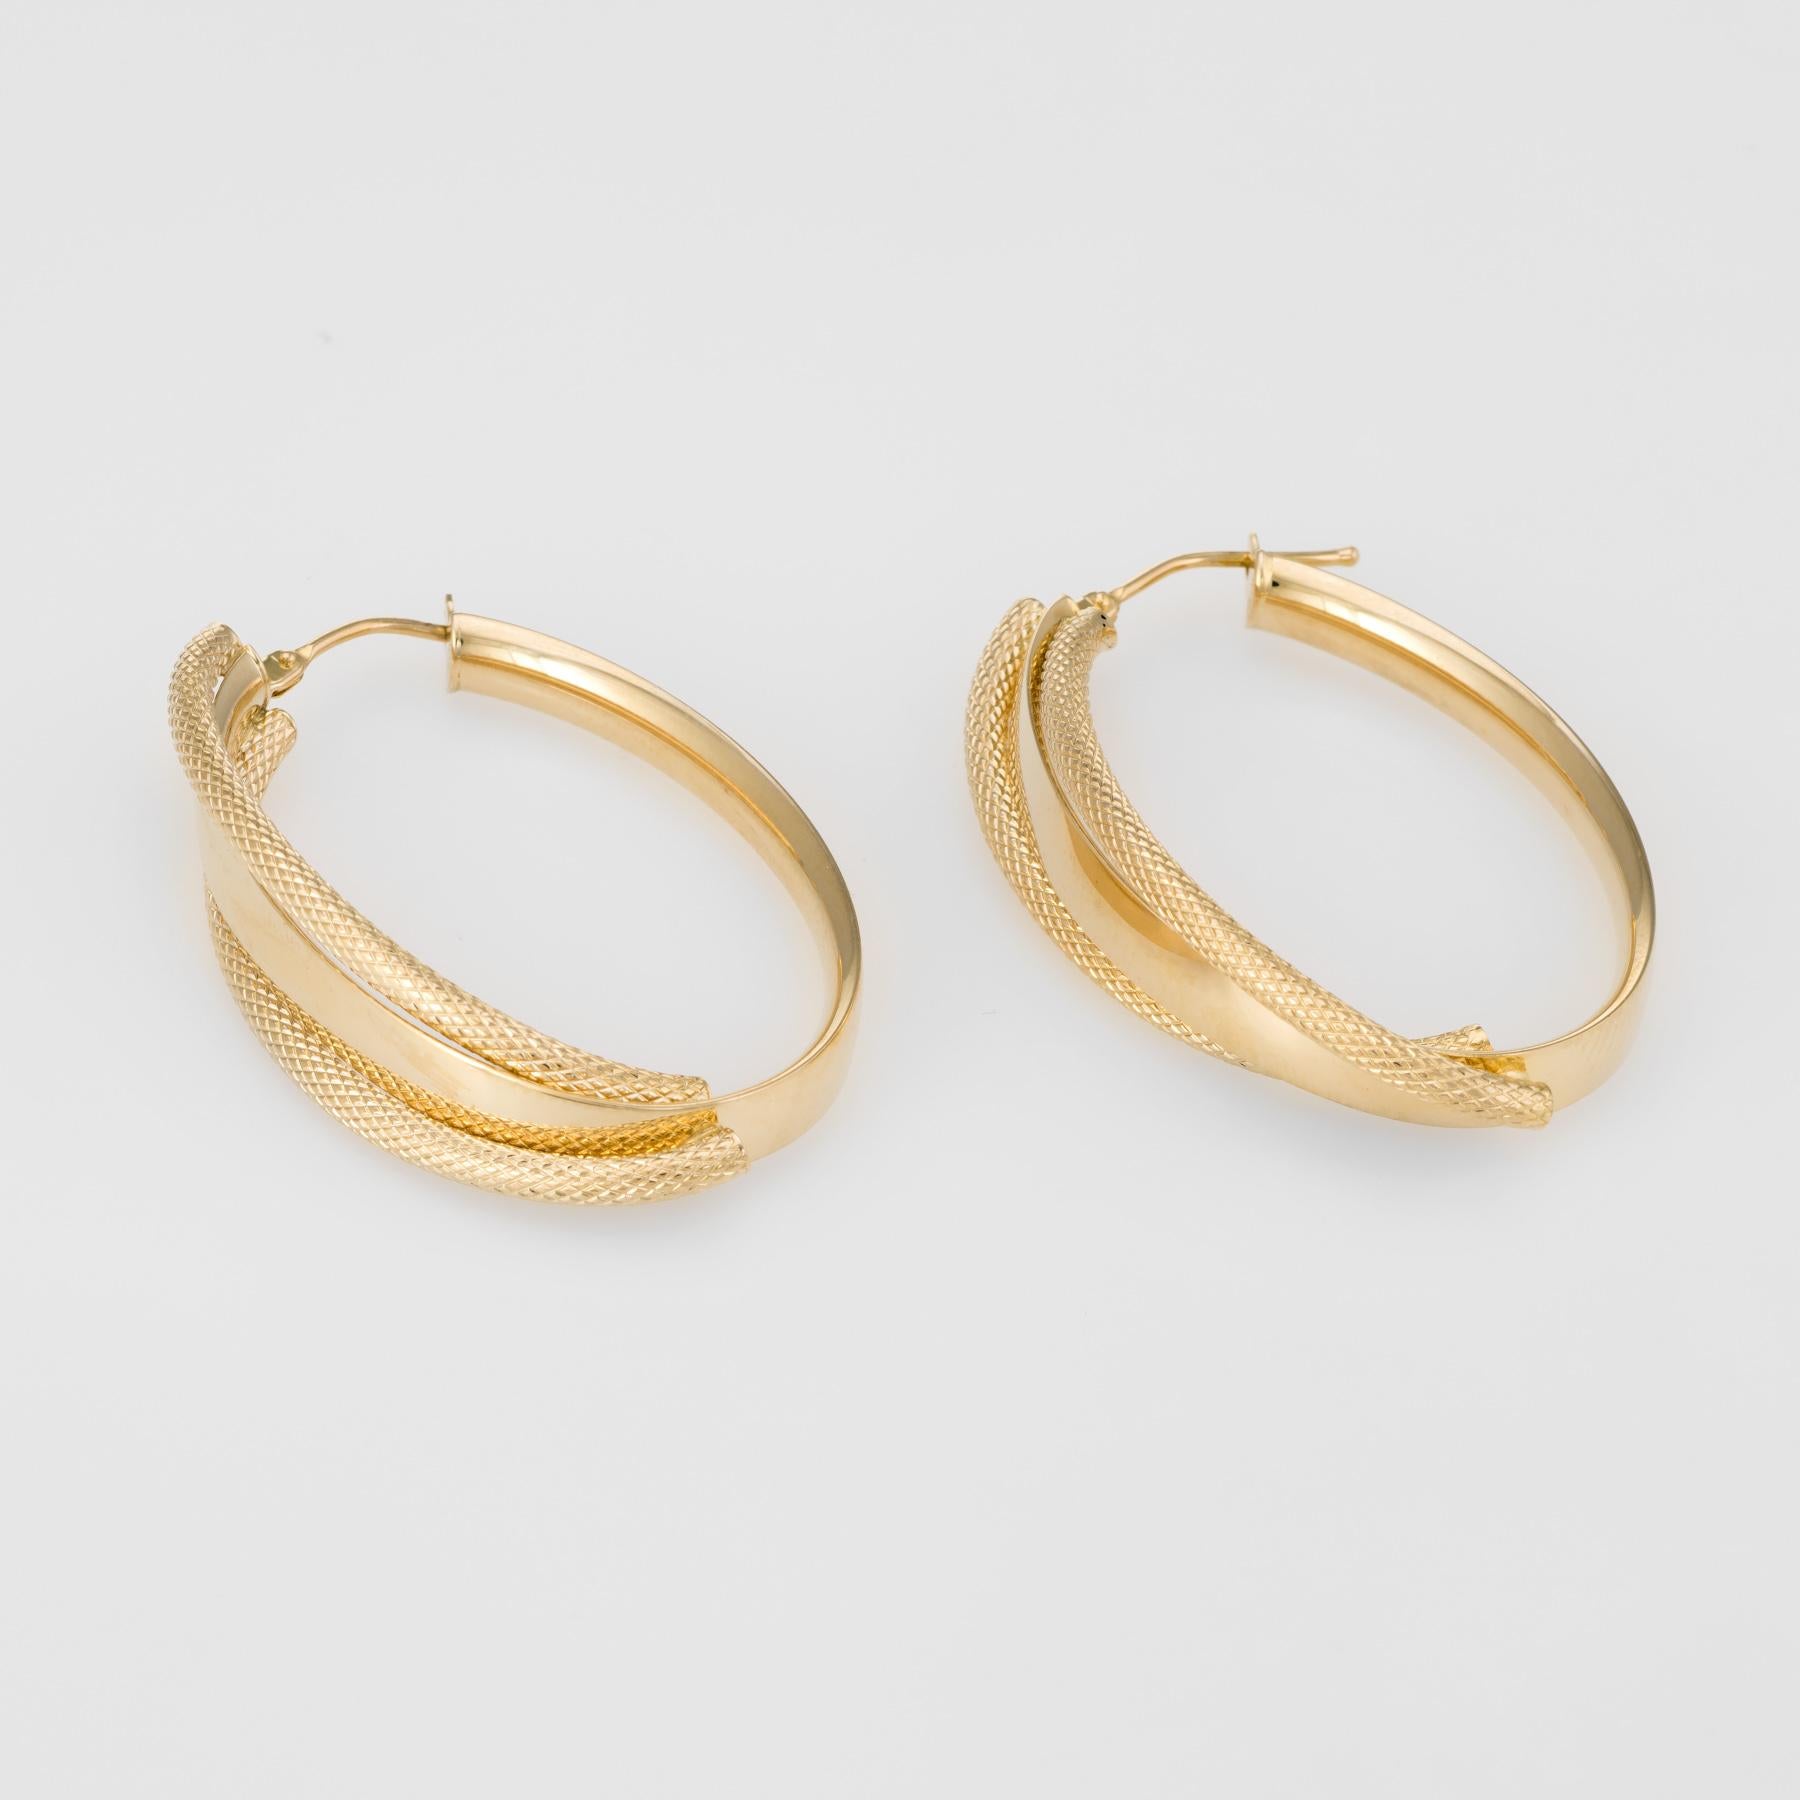 Elegant pair of textured hoop earrings, crafted in 14k yellow gold. 

The lightweight earrings (3.2 grams) have a bold look and are very comfortable to wear.   

The earrings feature lever backings.

The earrings are in excellent original